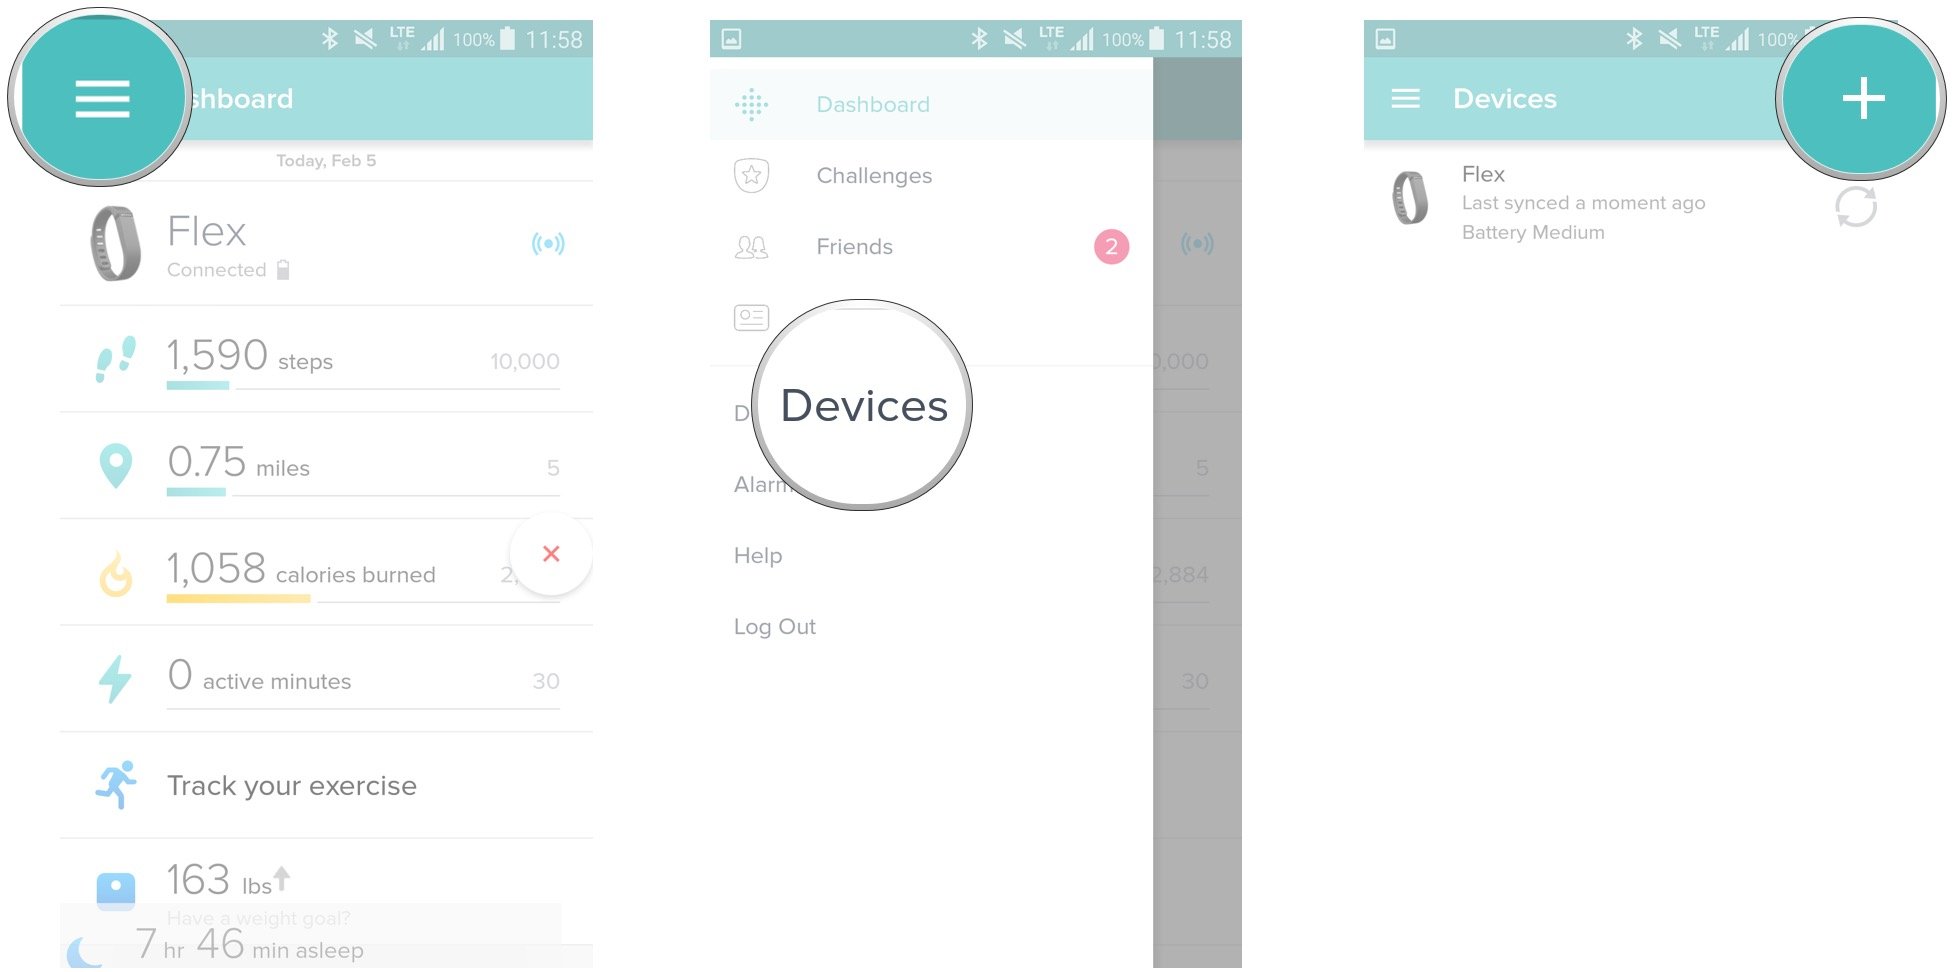 fitbit android version